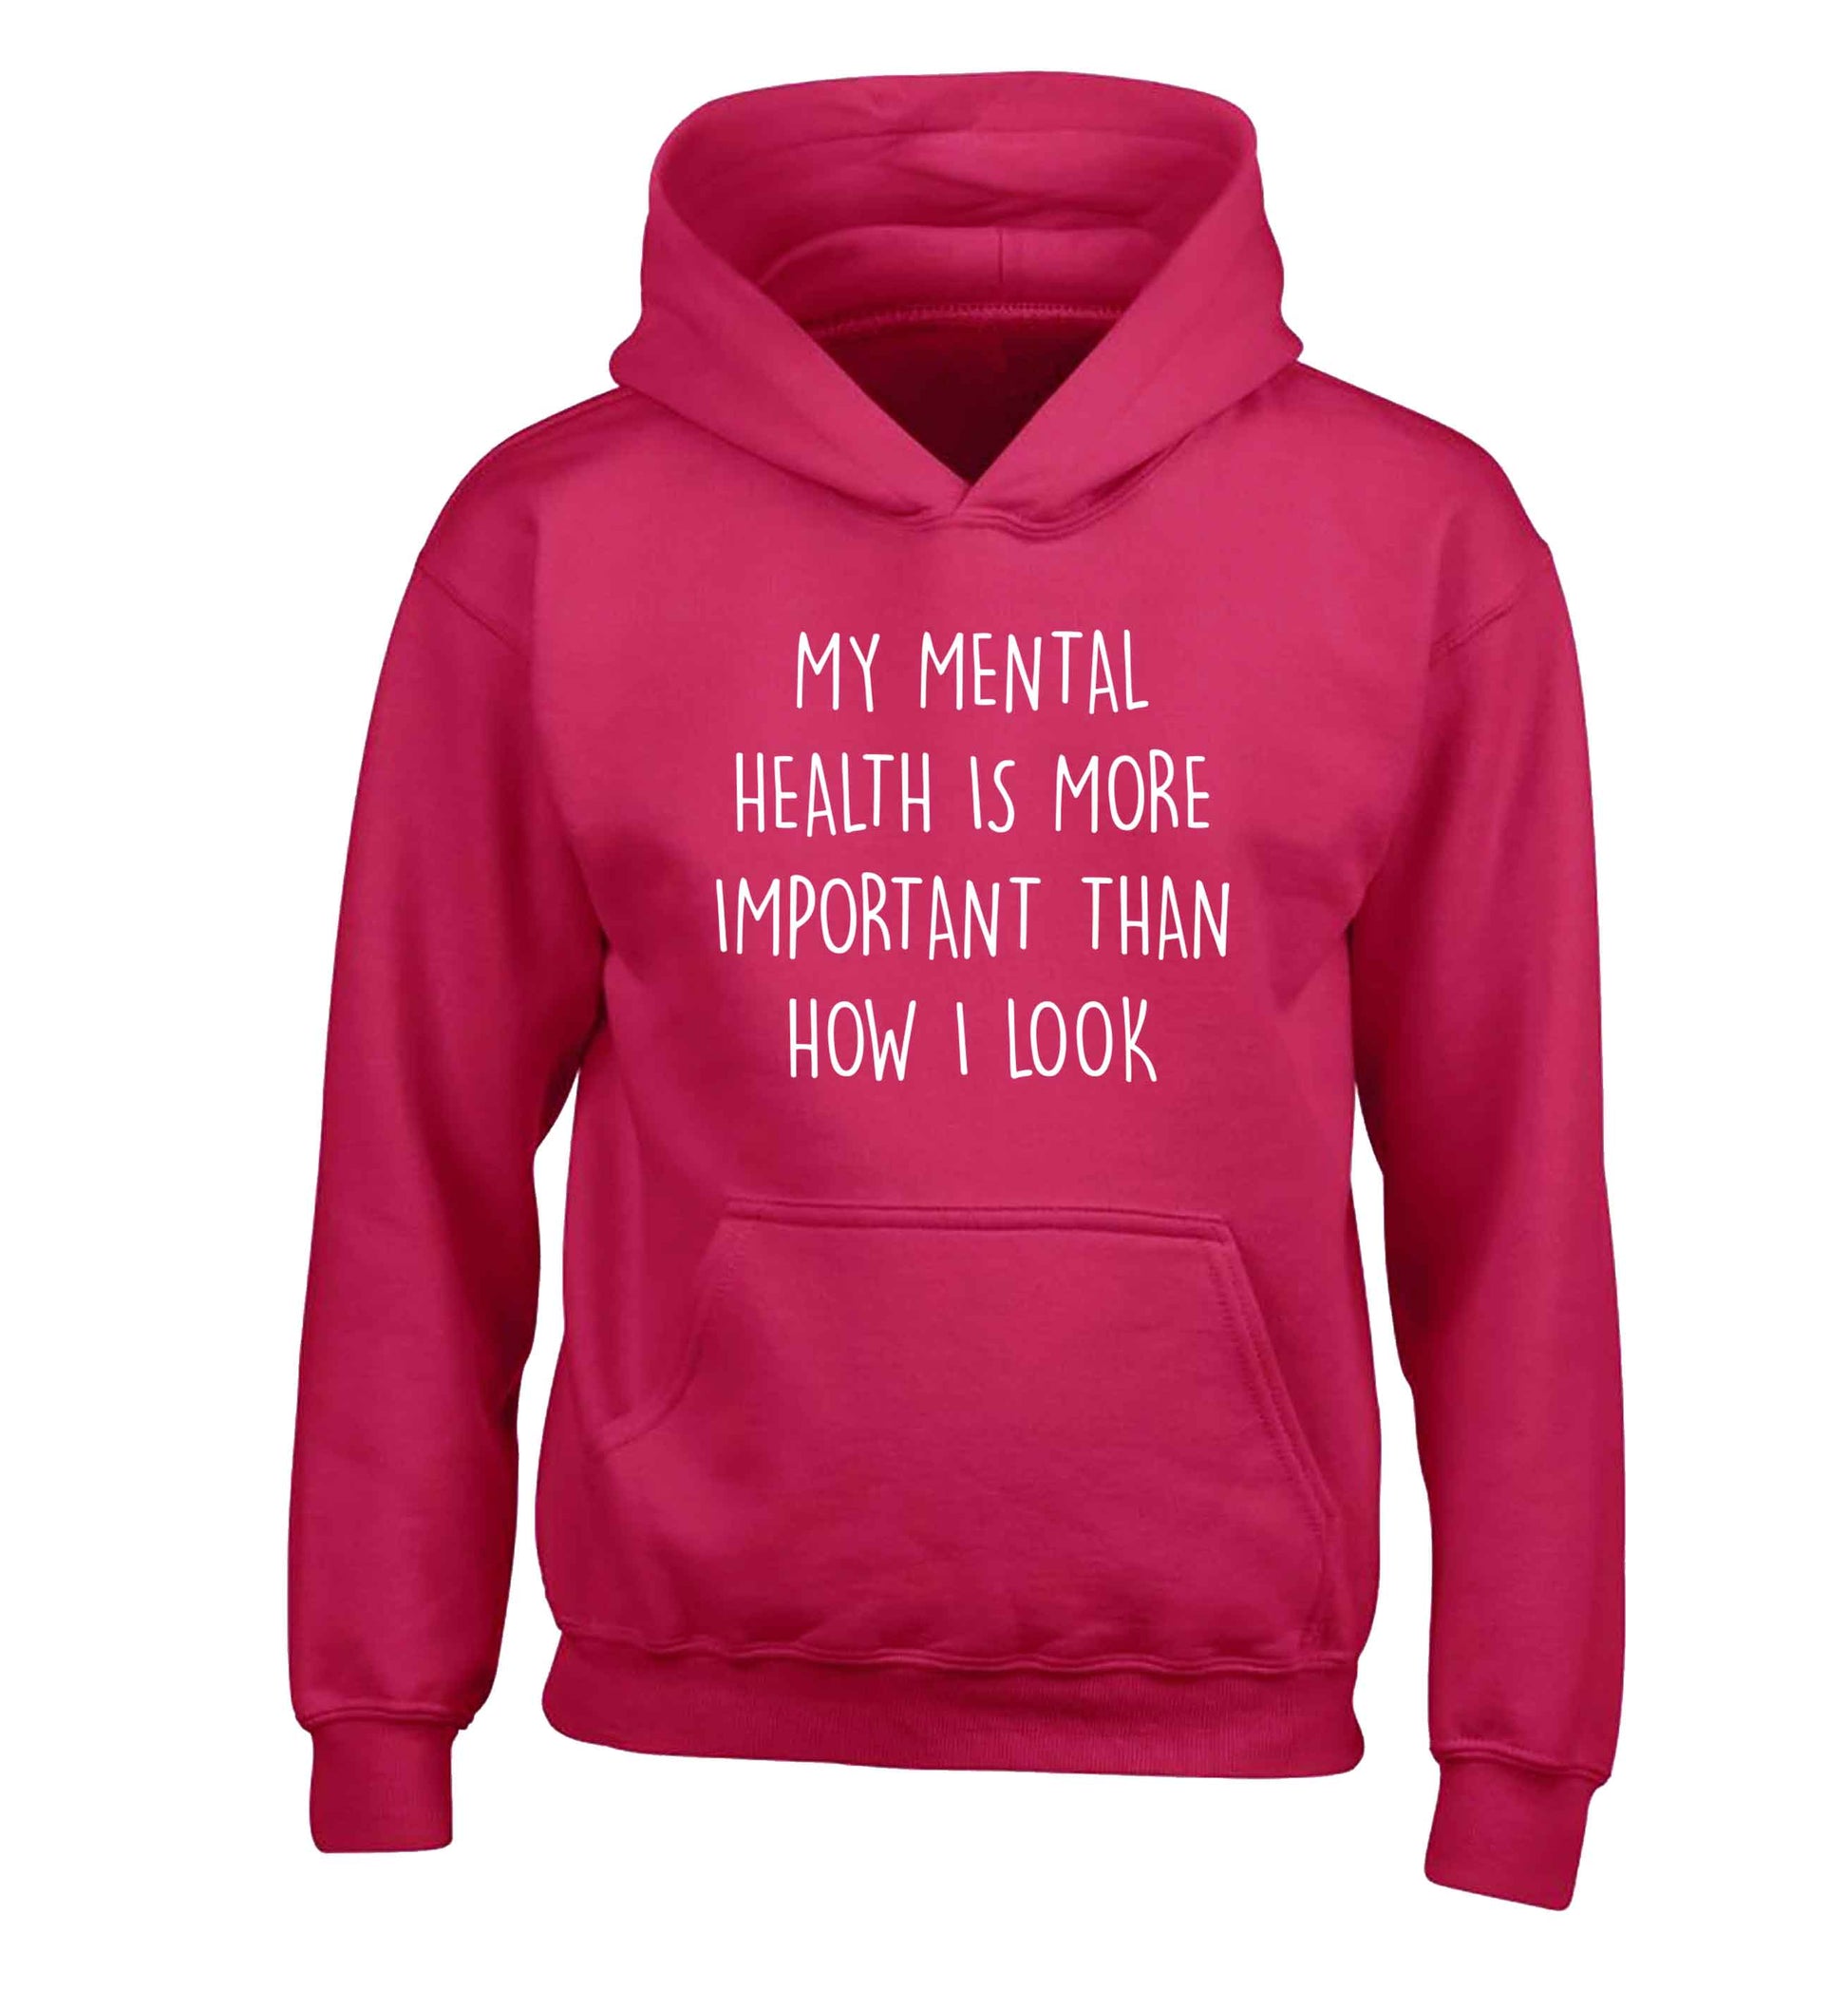 My mental health is more importnat than how I look children's pink hoodie 12-13 Years